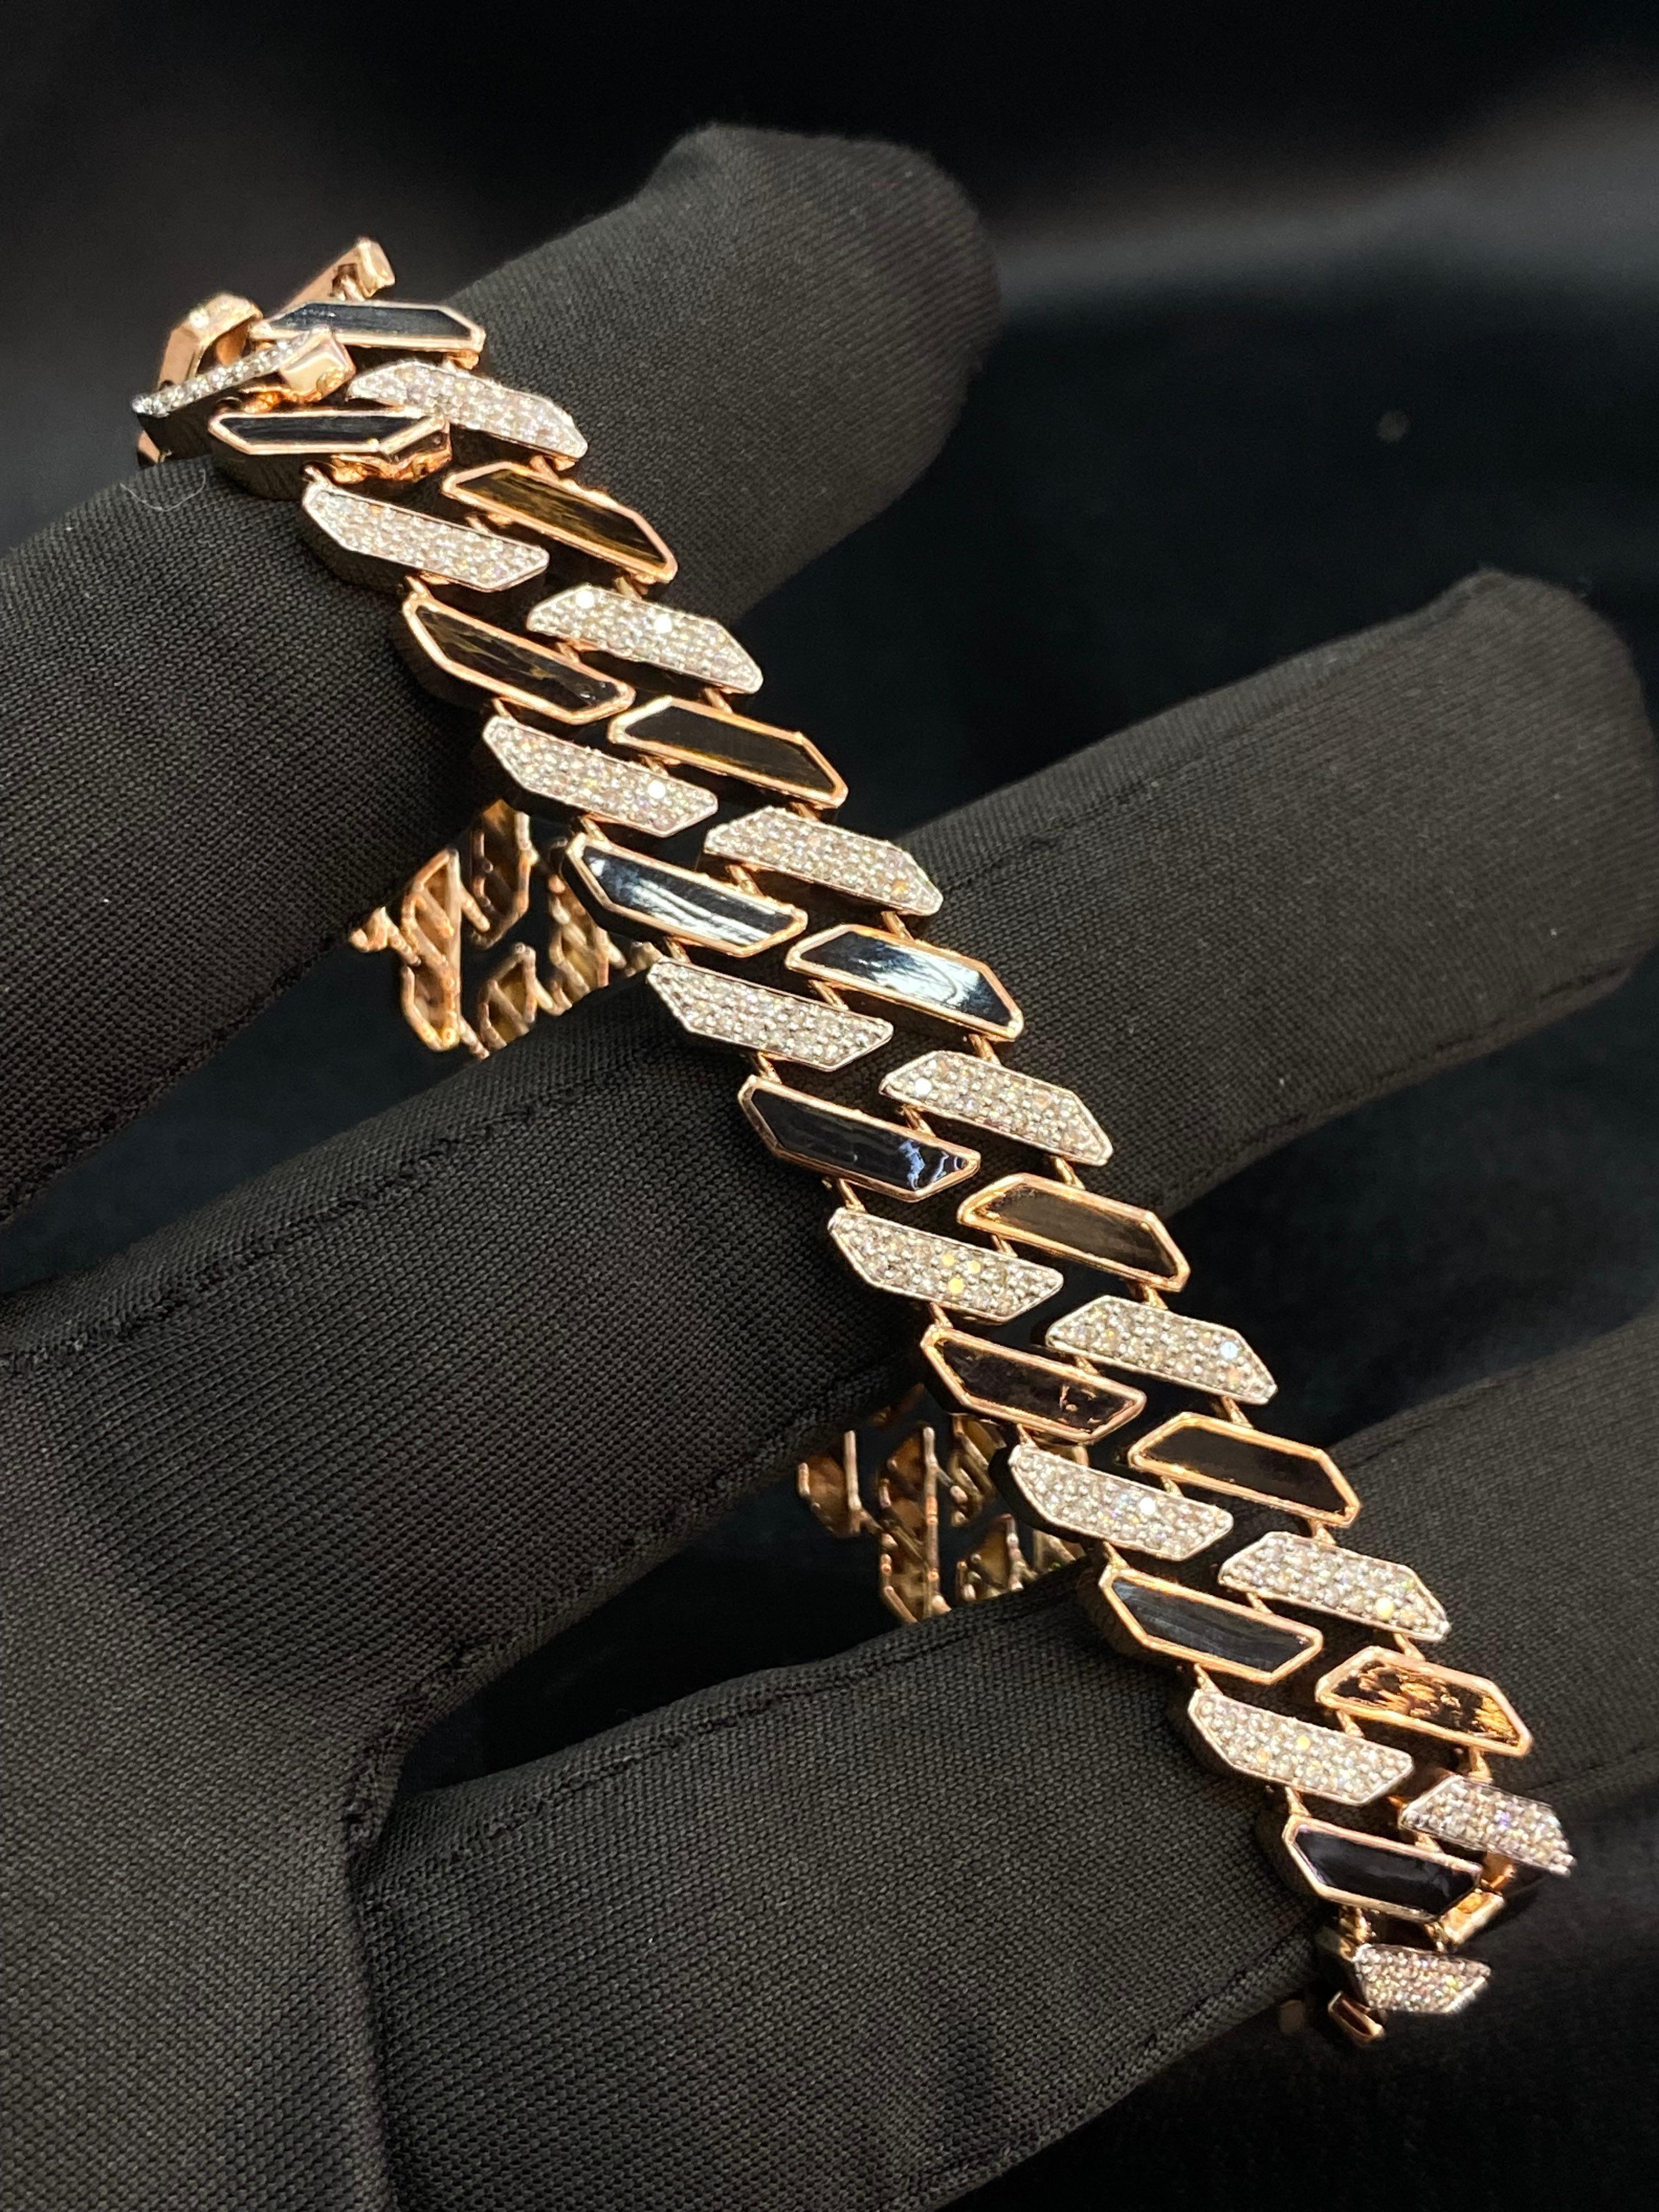 A bracelet holds a special charm, capable of eliciting that priceless smile. Behold this men's tennis bracelet adorned with 2.35 carat diamonds in 14k gold, a piece that exudes regal splendor, making you feel like royalty!

Specifications:
Metal :